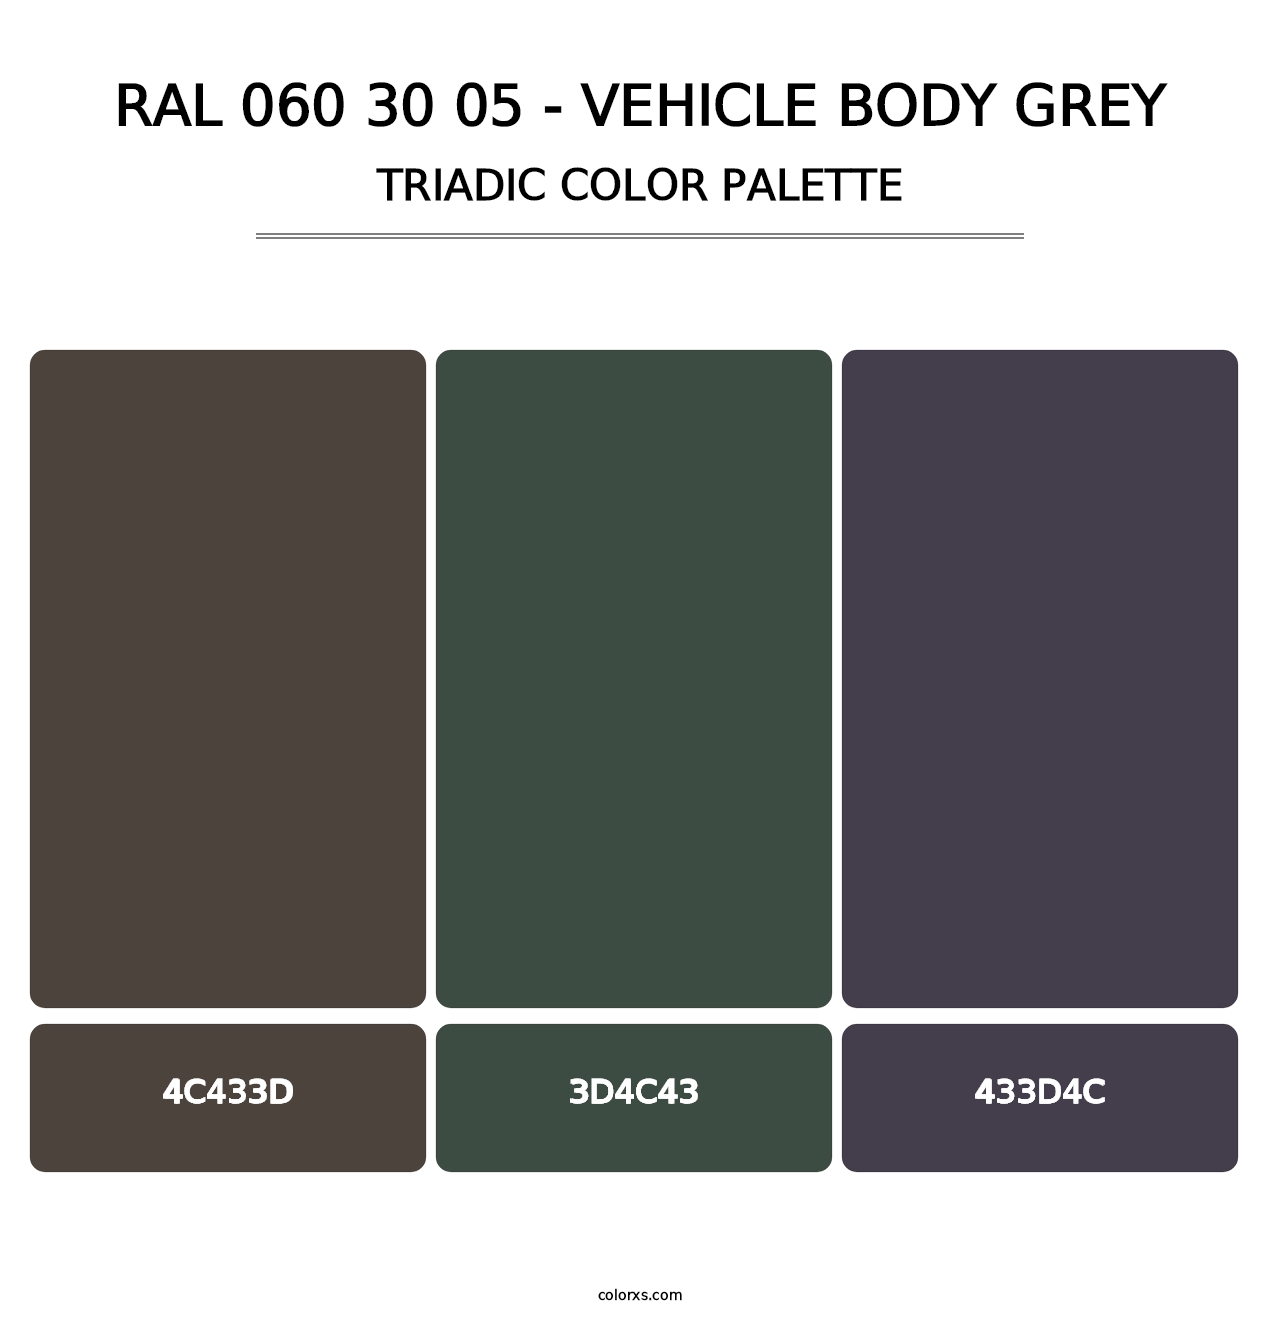 RAL 060 30 05 - Vehicle Body Grey - Triadic Color Palette